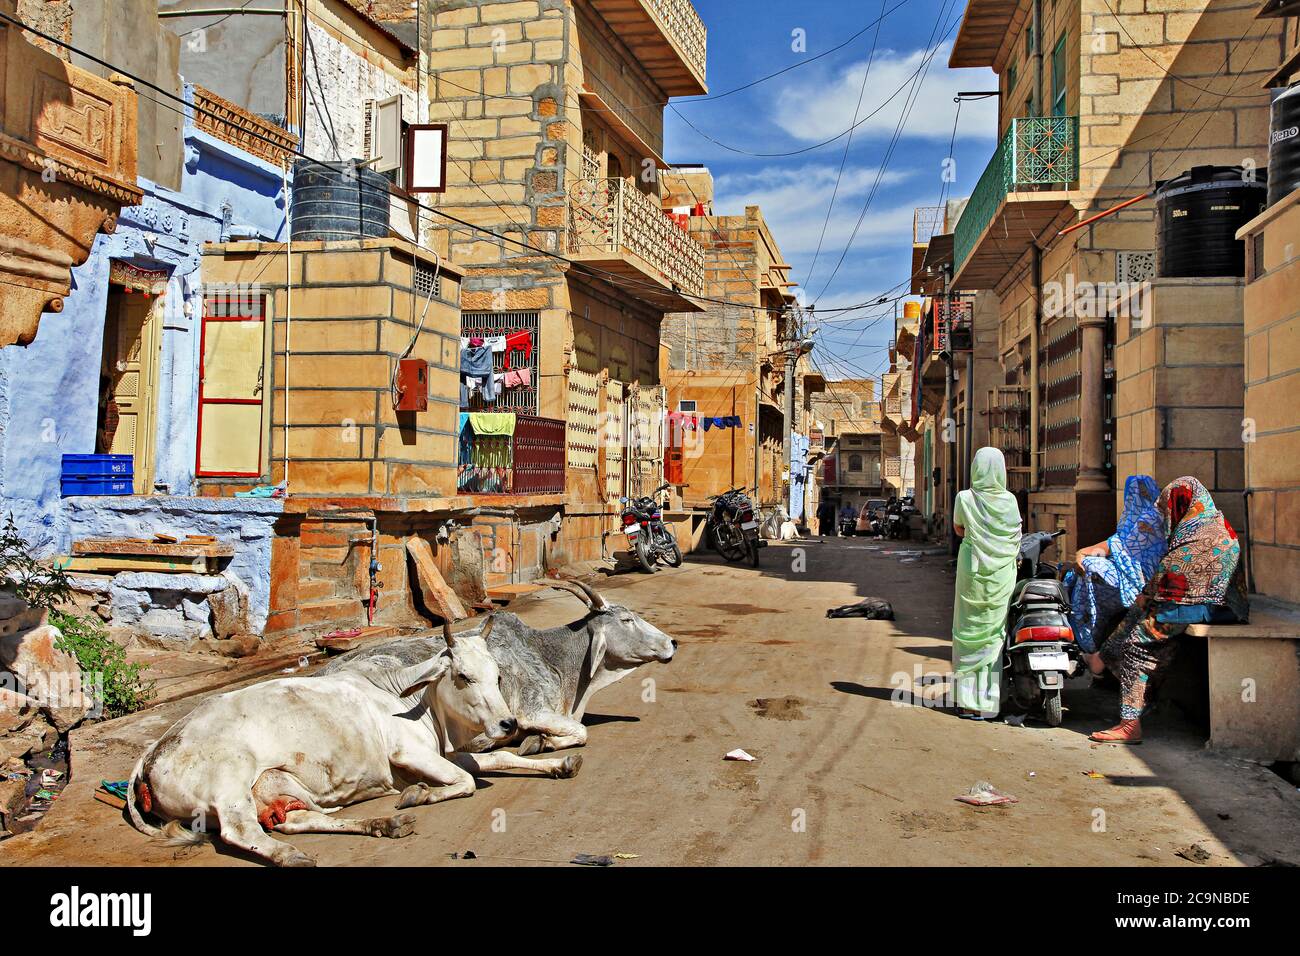 Daily life of Indian old town Jaisalmer. People and cows on the streets. Rajasthan Feb 2013. India Stock Photo